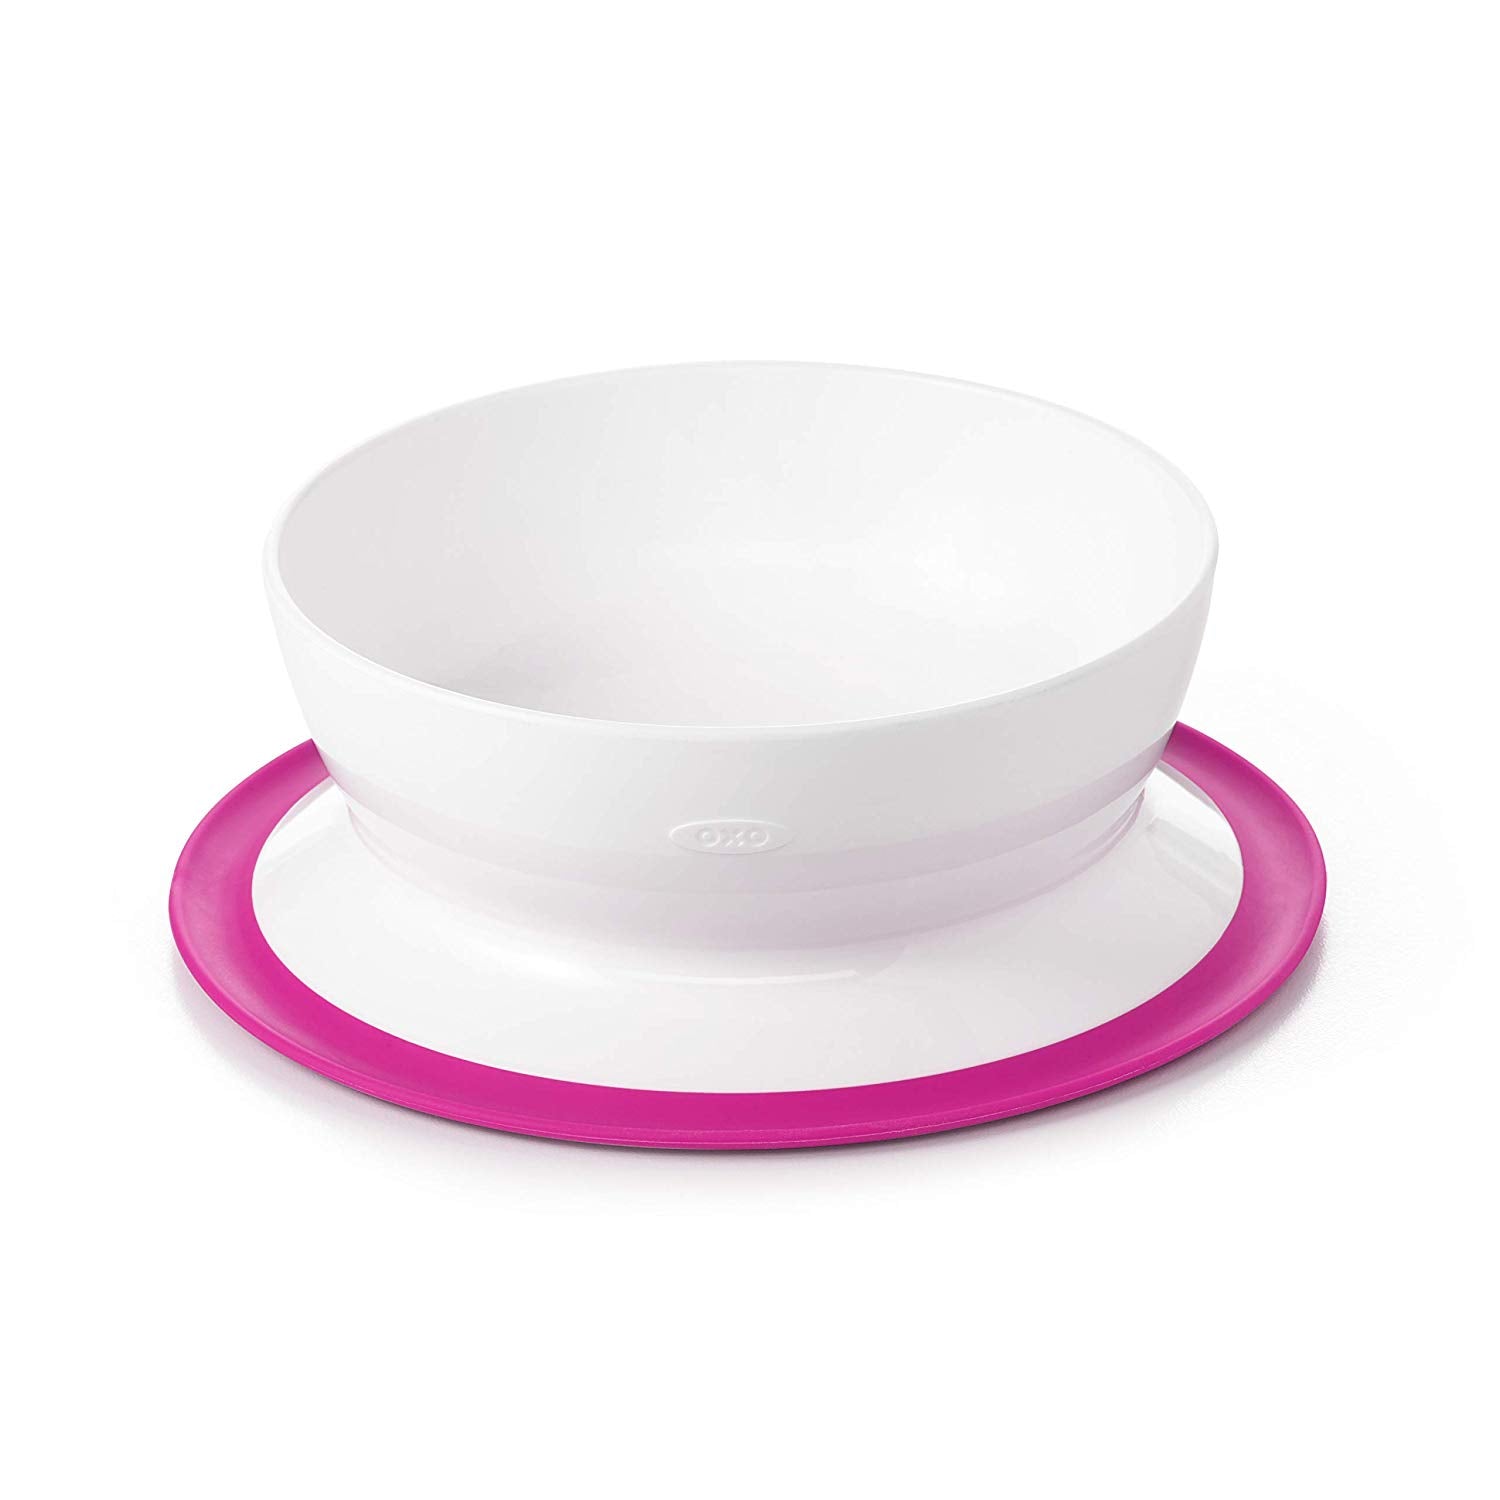 OXO Tot SUCTION BOWL